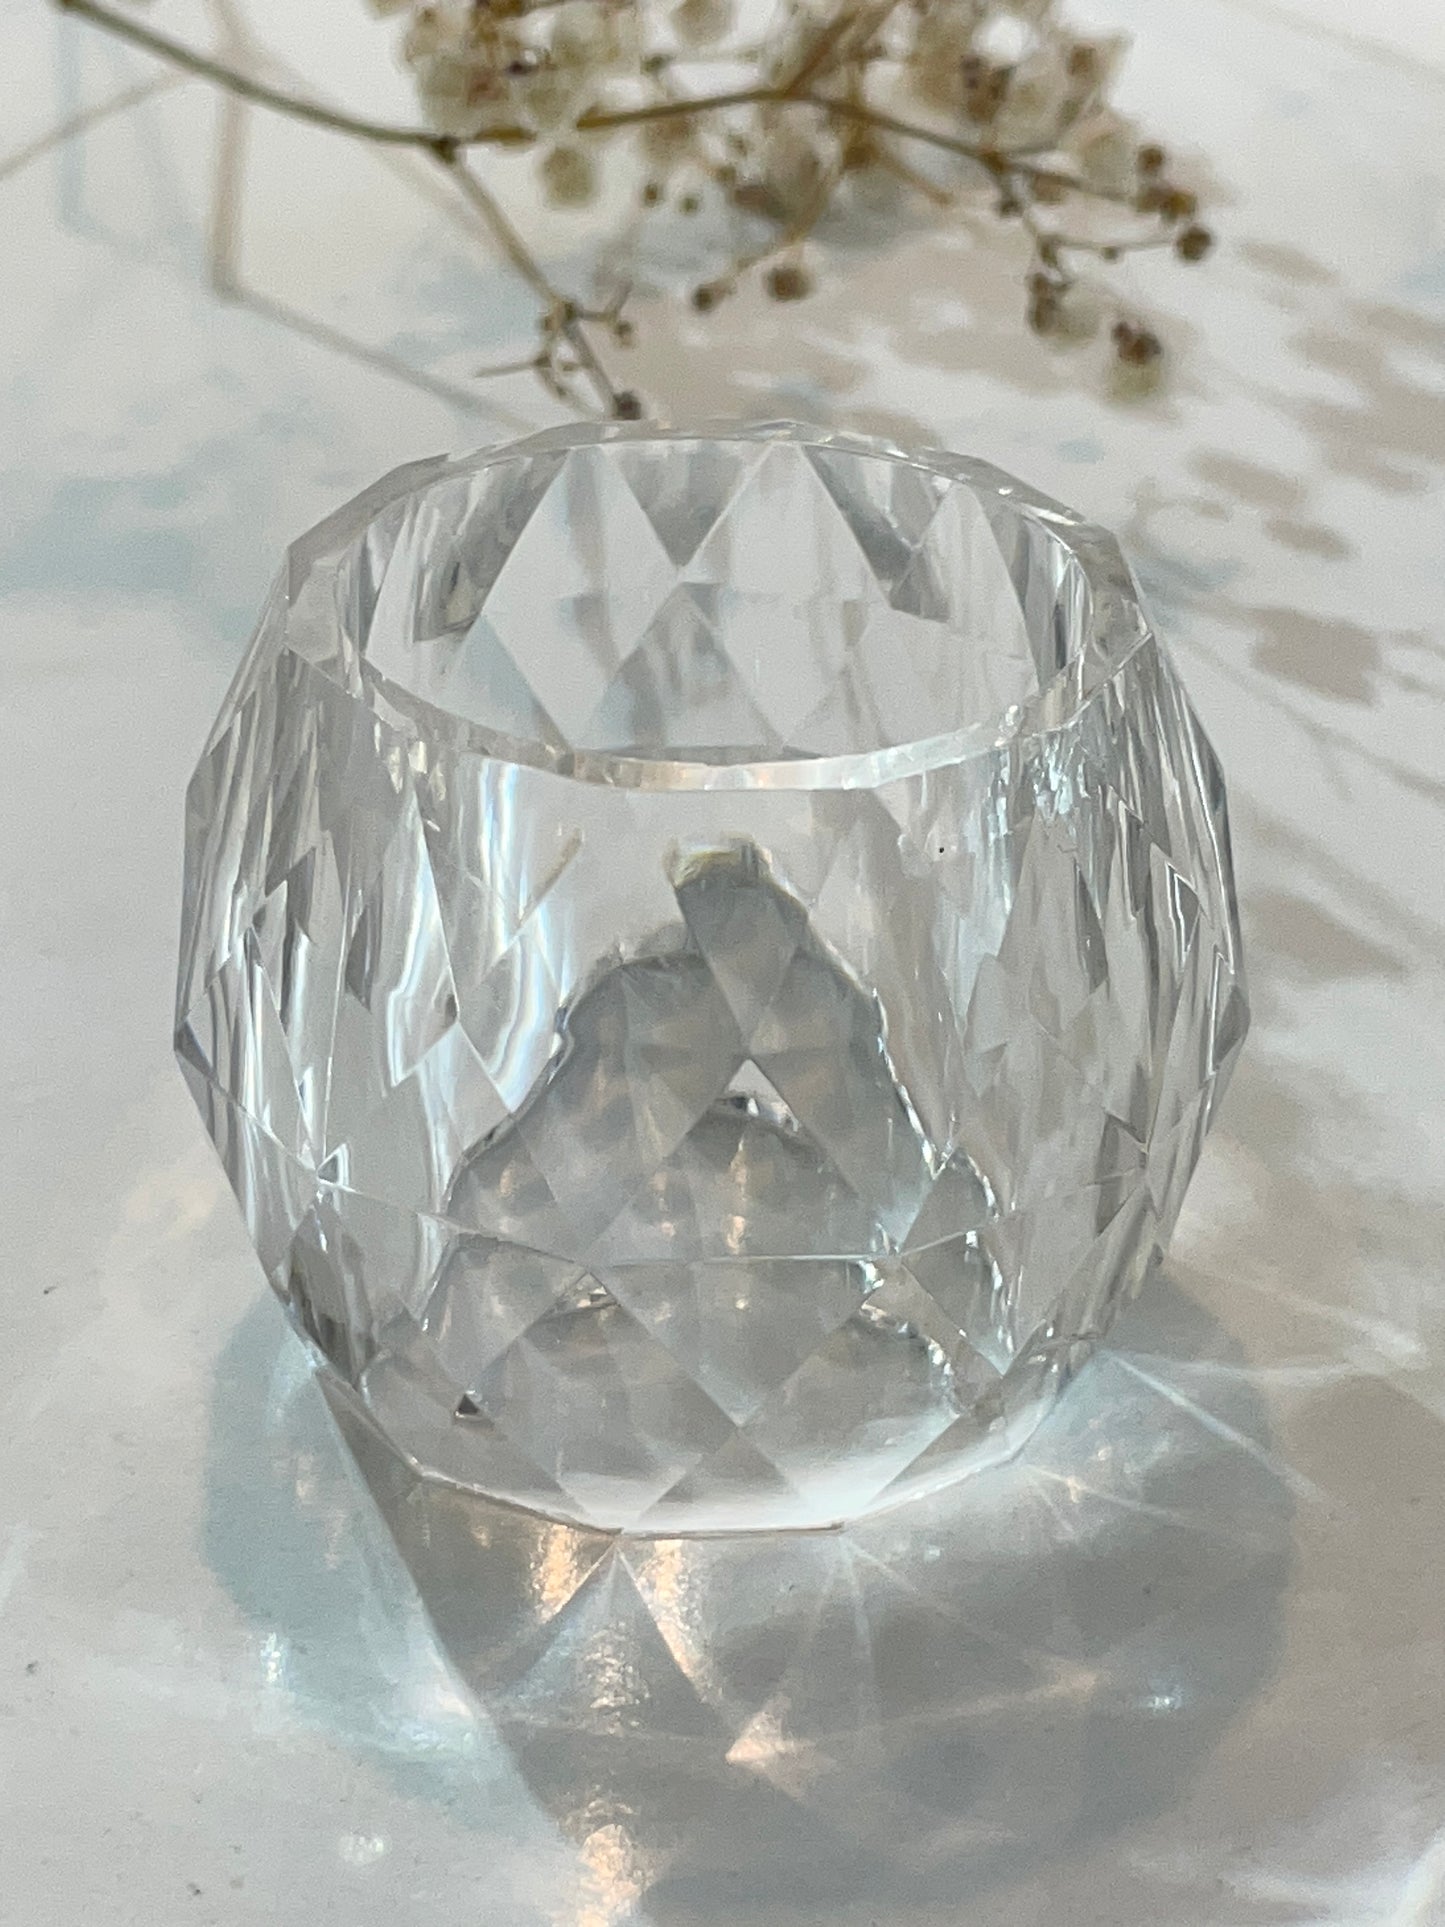 Crystal Ring Napkins: Silicone Mold for Elegant Table Decor